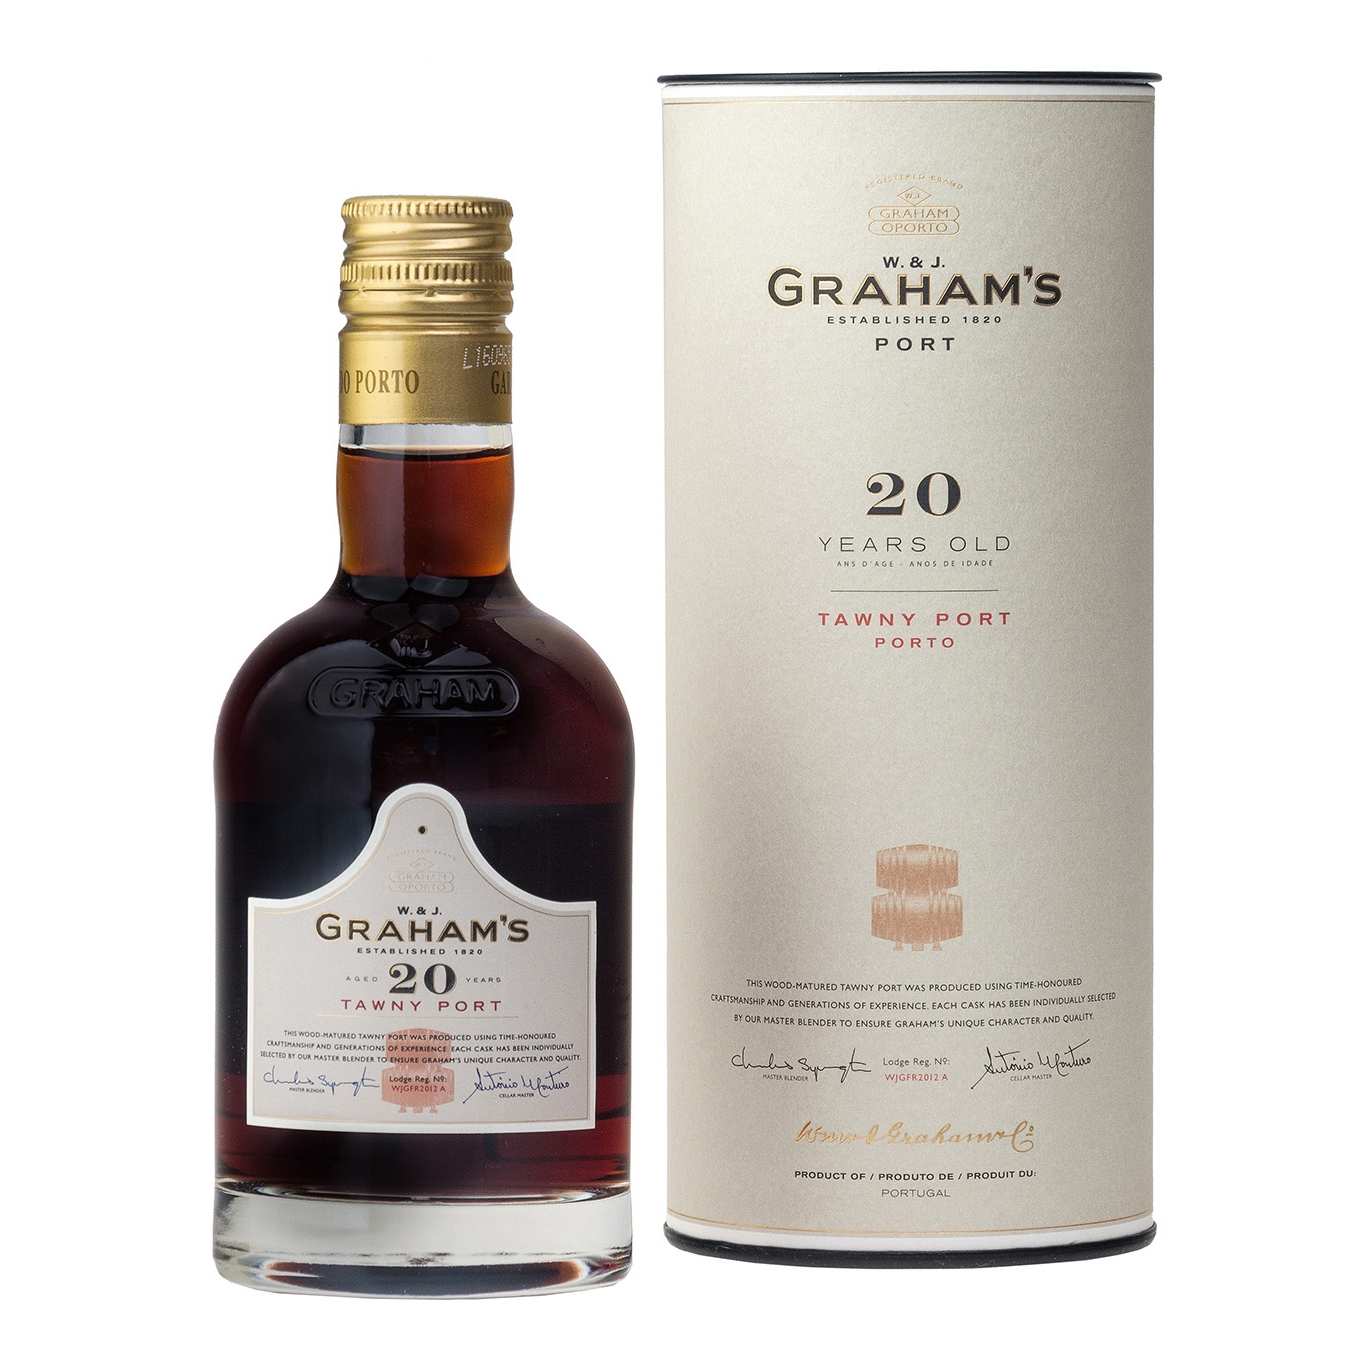 W & J Graham's 20 Years Old Tawny Port 200ml Port And Fortified Wine